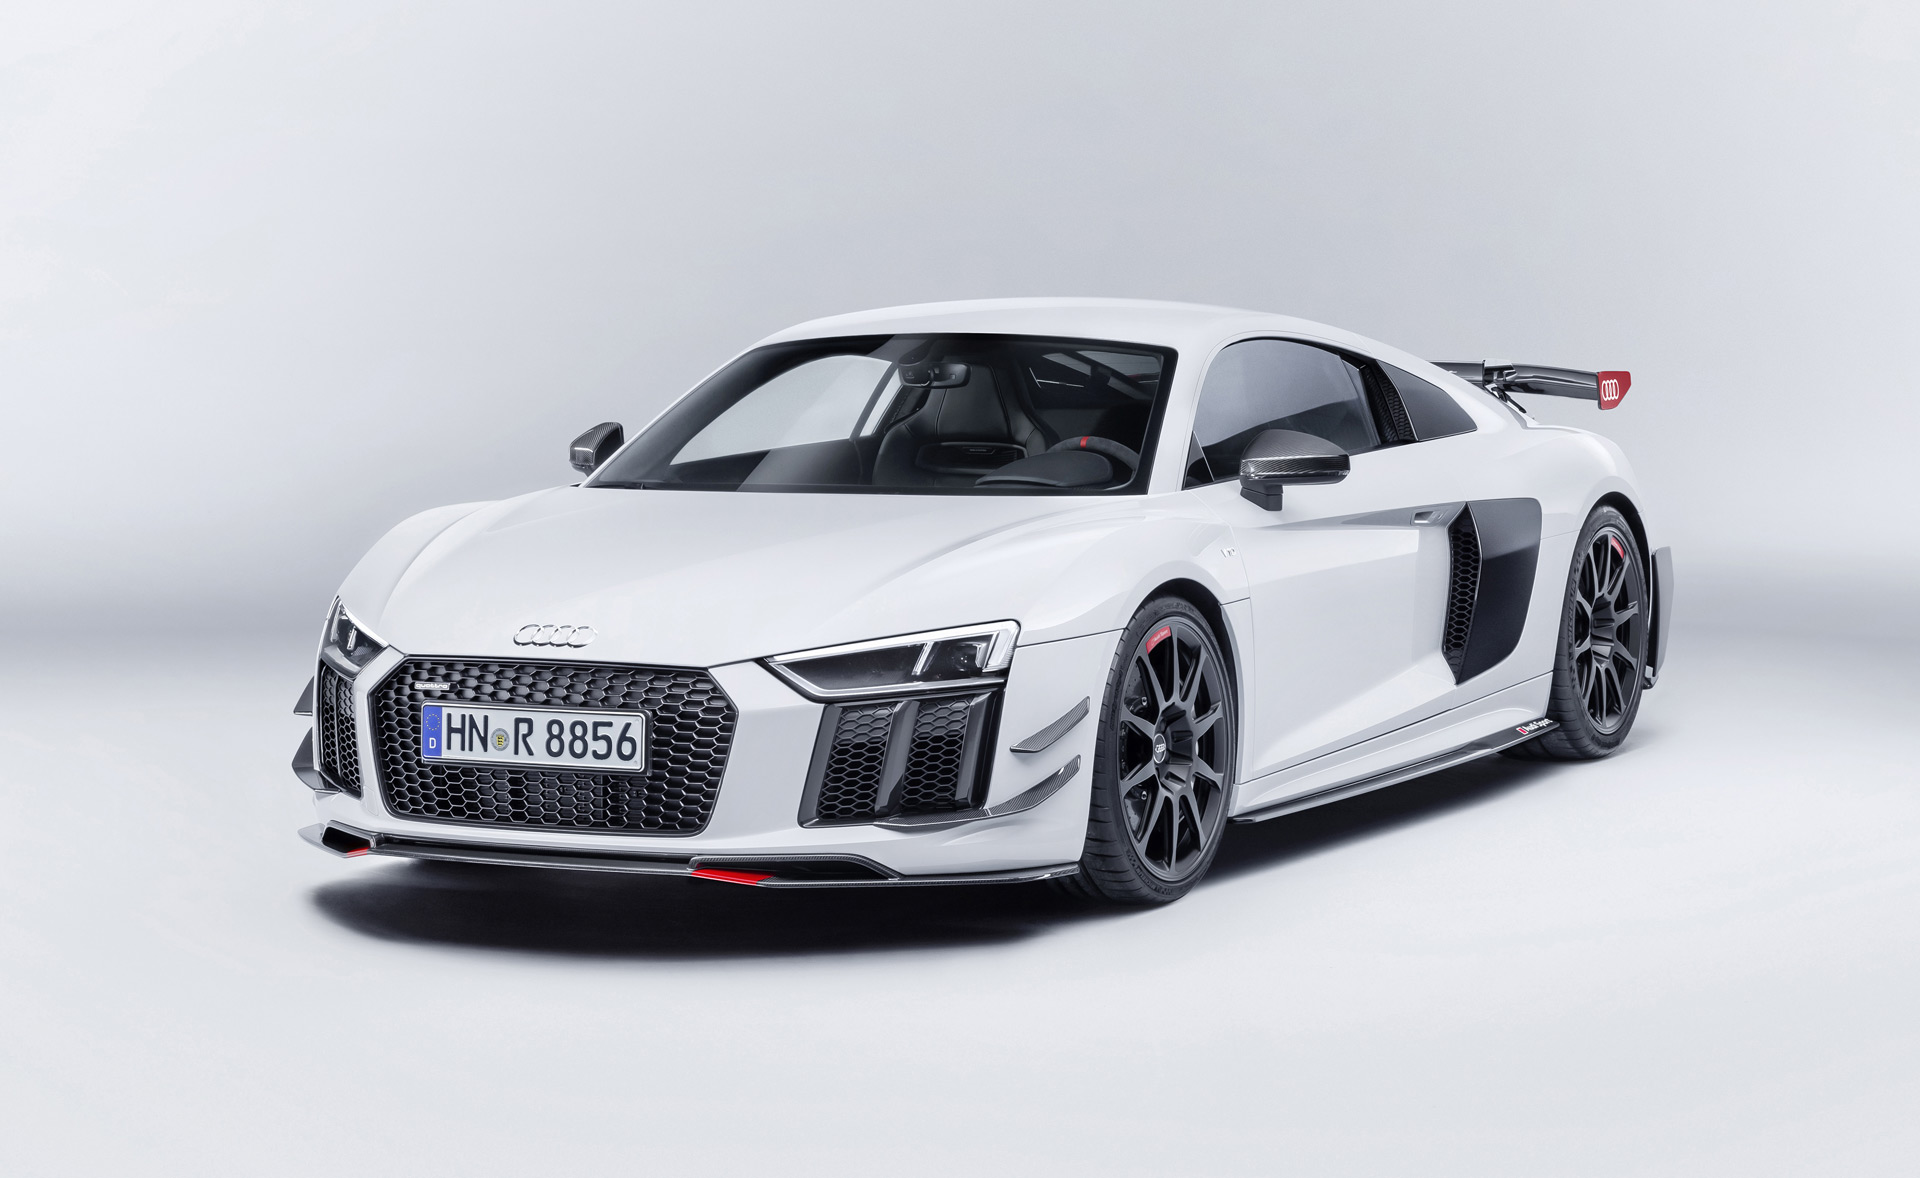 2018-audi-r8-fitted-with-items-from-audi-sport-performance-parts-range_100613503_h.jpg